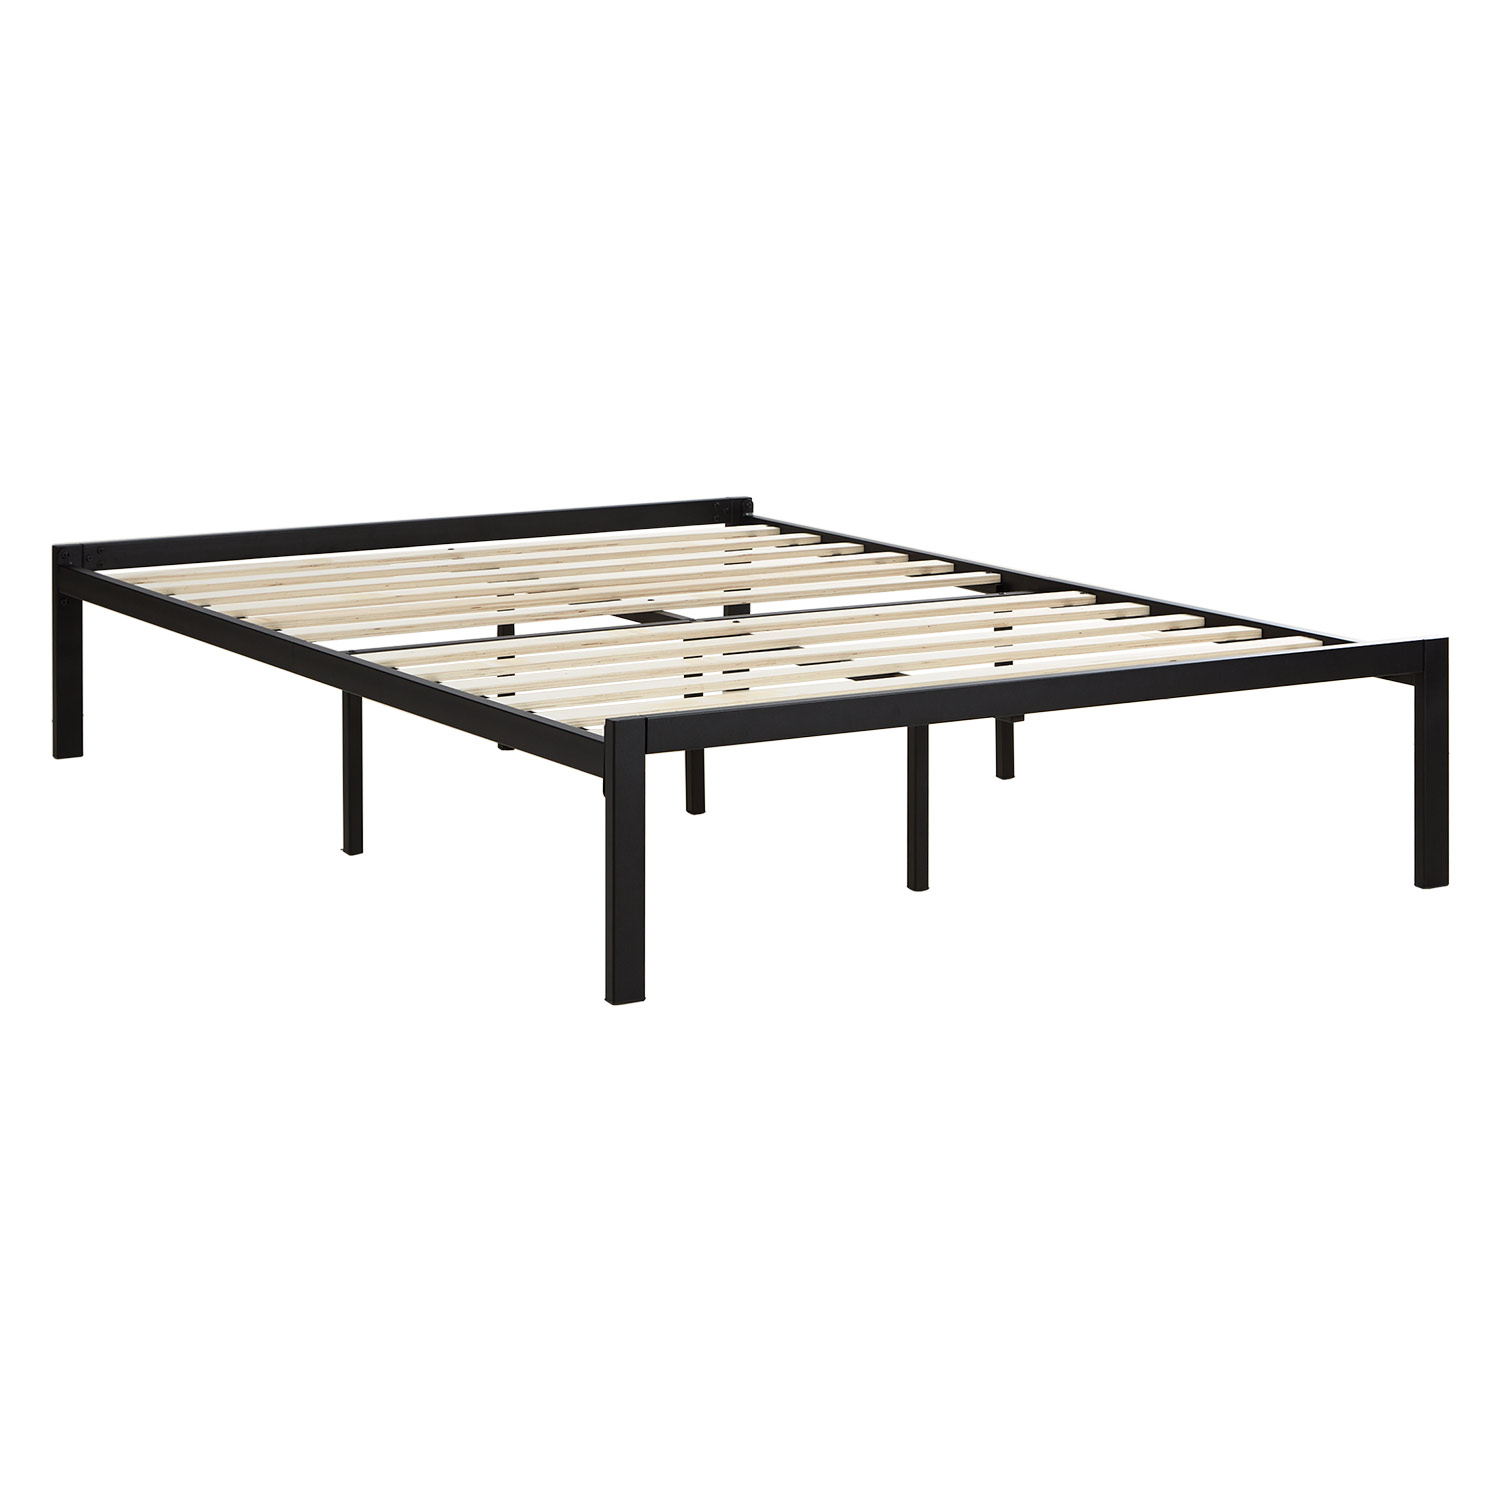 Solid Metal Bed with Mattress 140x200 cm Slatts Double Bed Black Futon Bed Platform Bed Frame Guest Bed